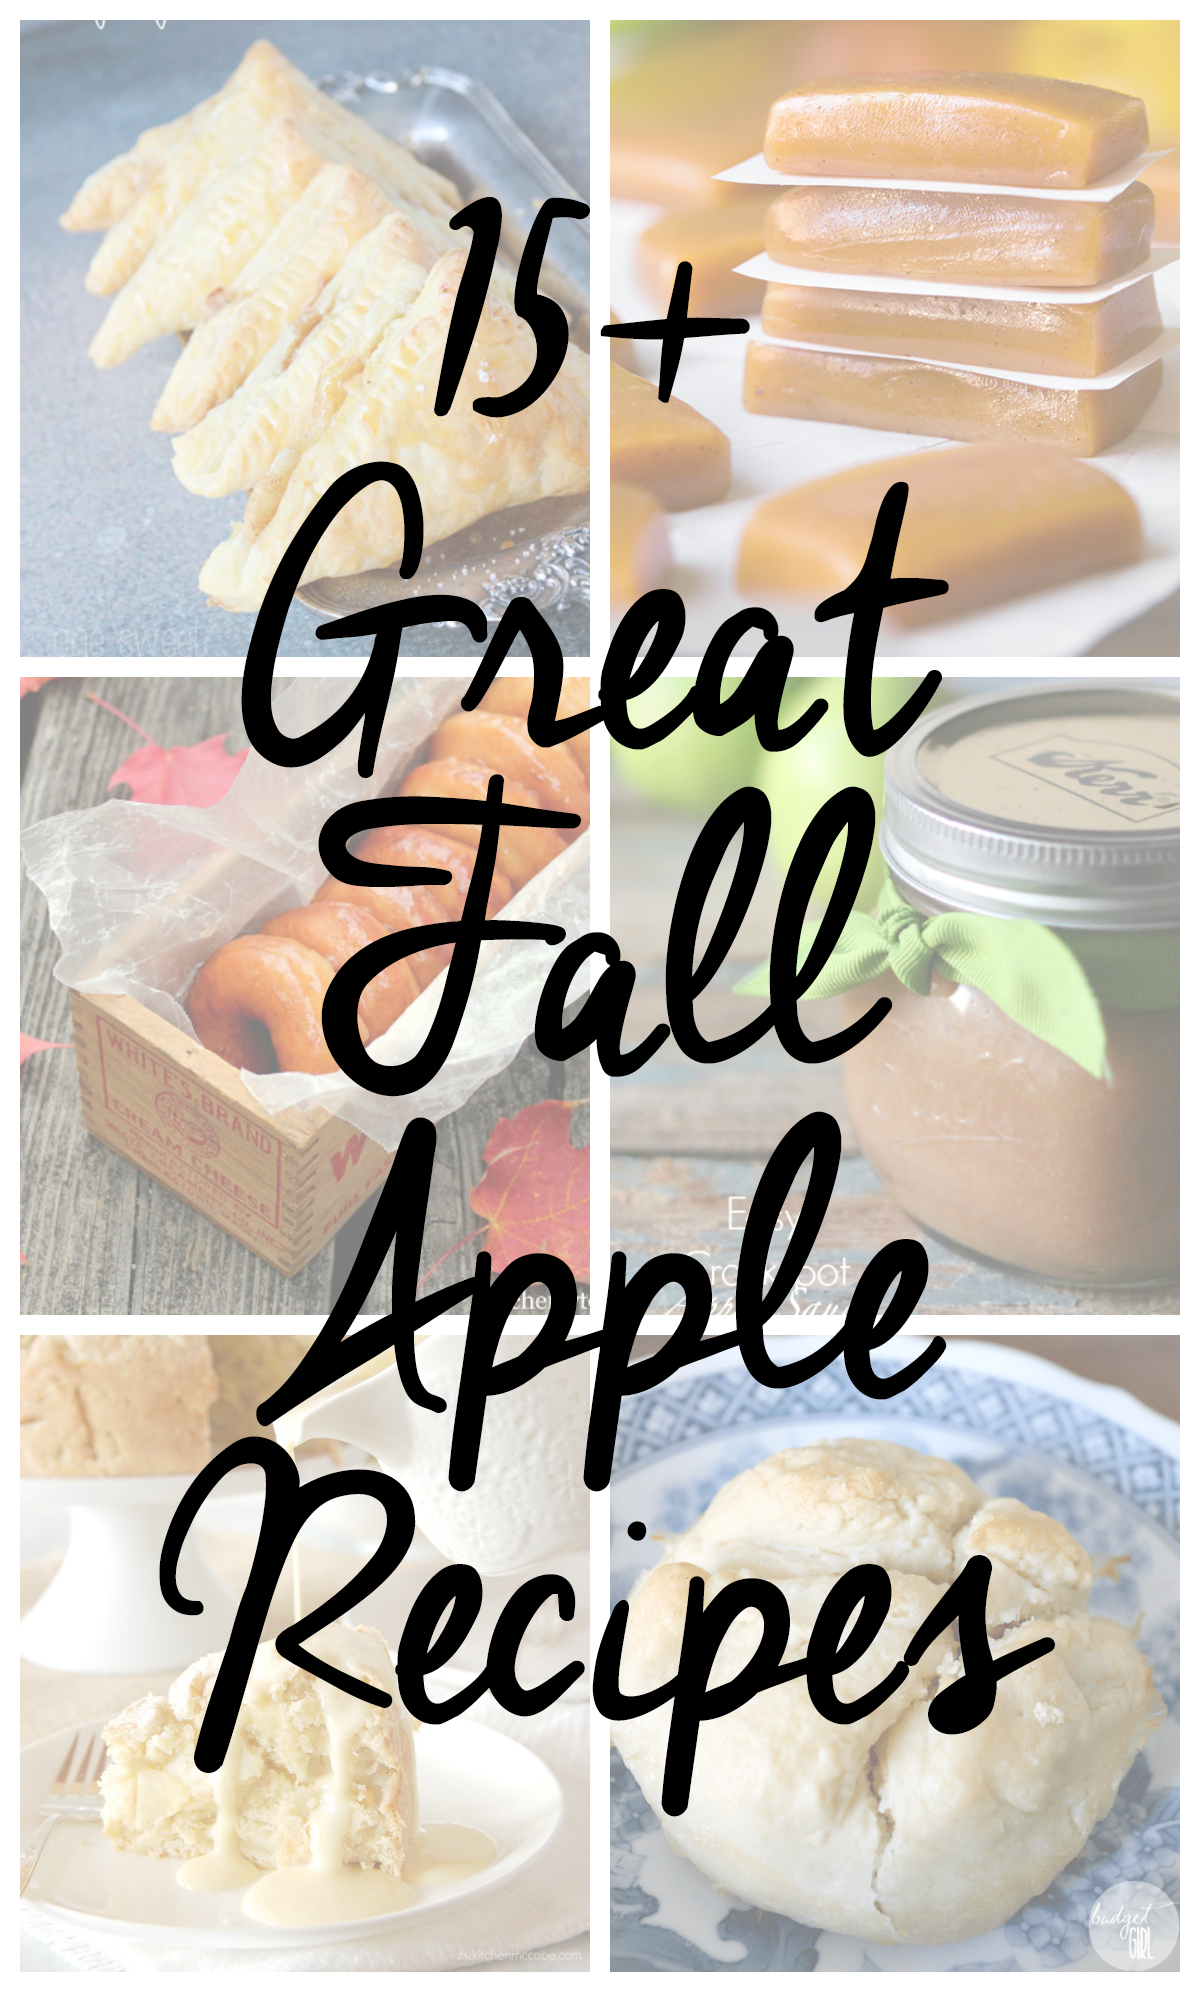 What better way to welcome fall than with some of the Internet's best fall apple recipes?